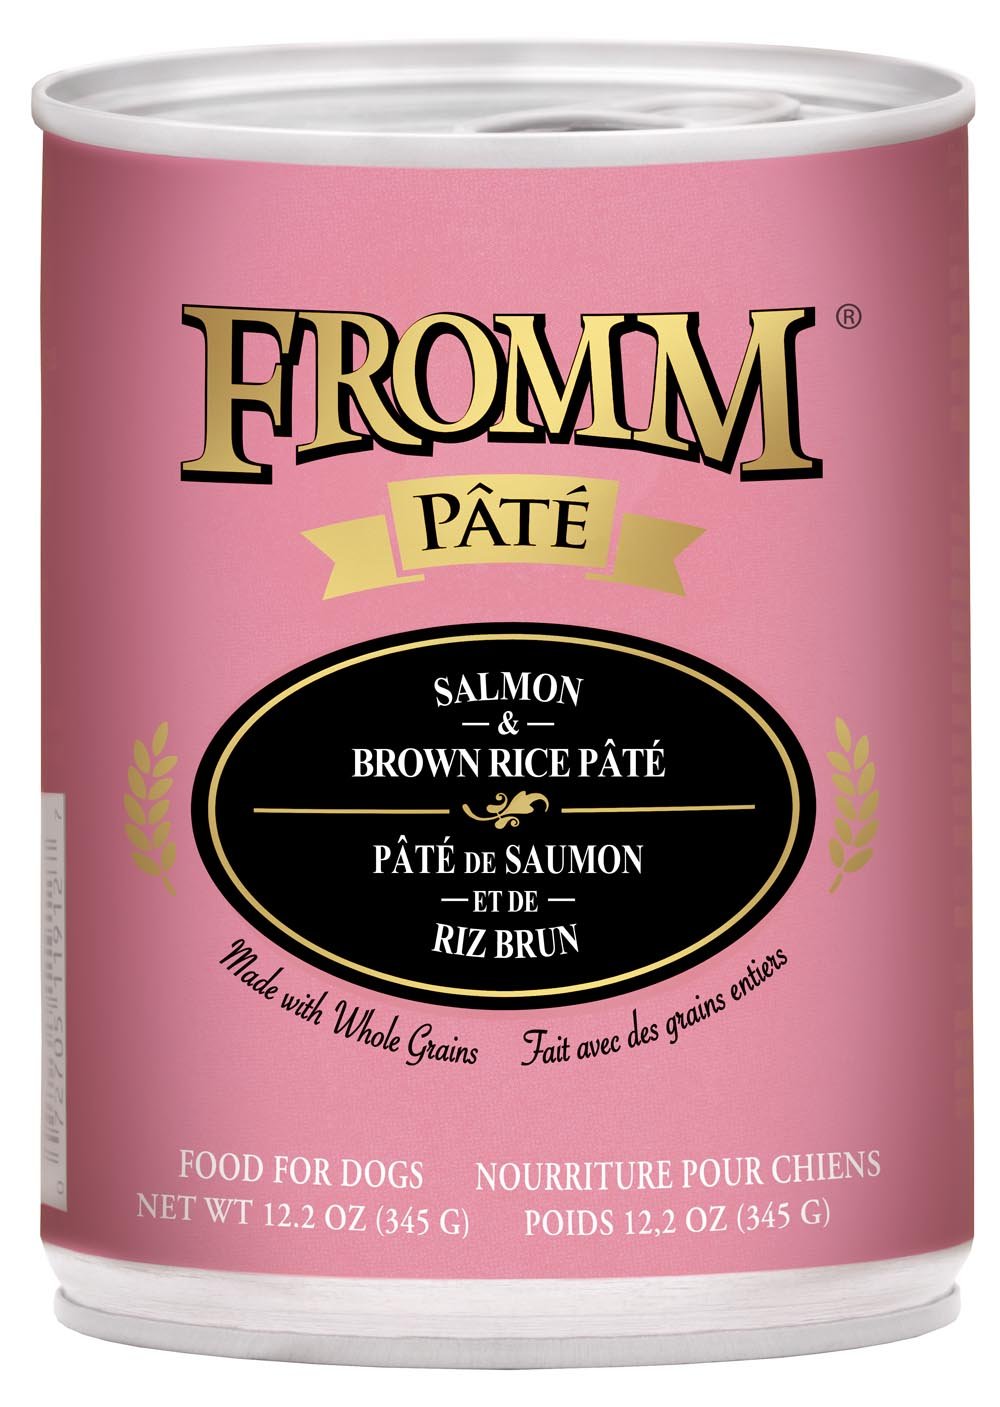 Fromm Pate Salmon Br Rice 12.2oz Dog